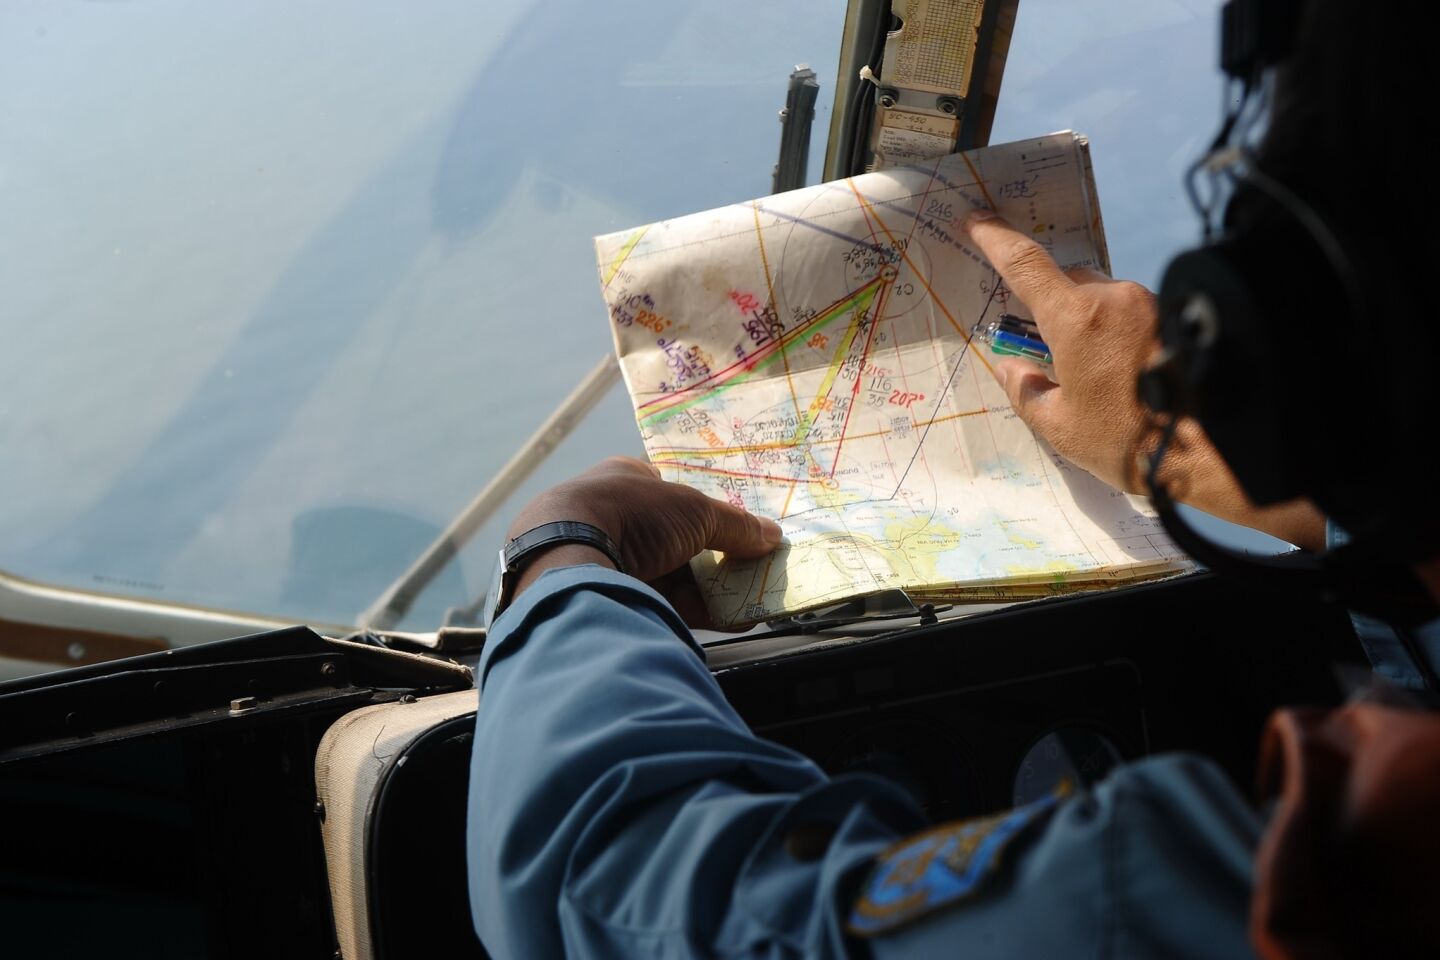 Search for missing Malaysia Airlines jet